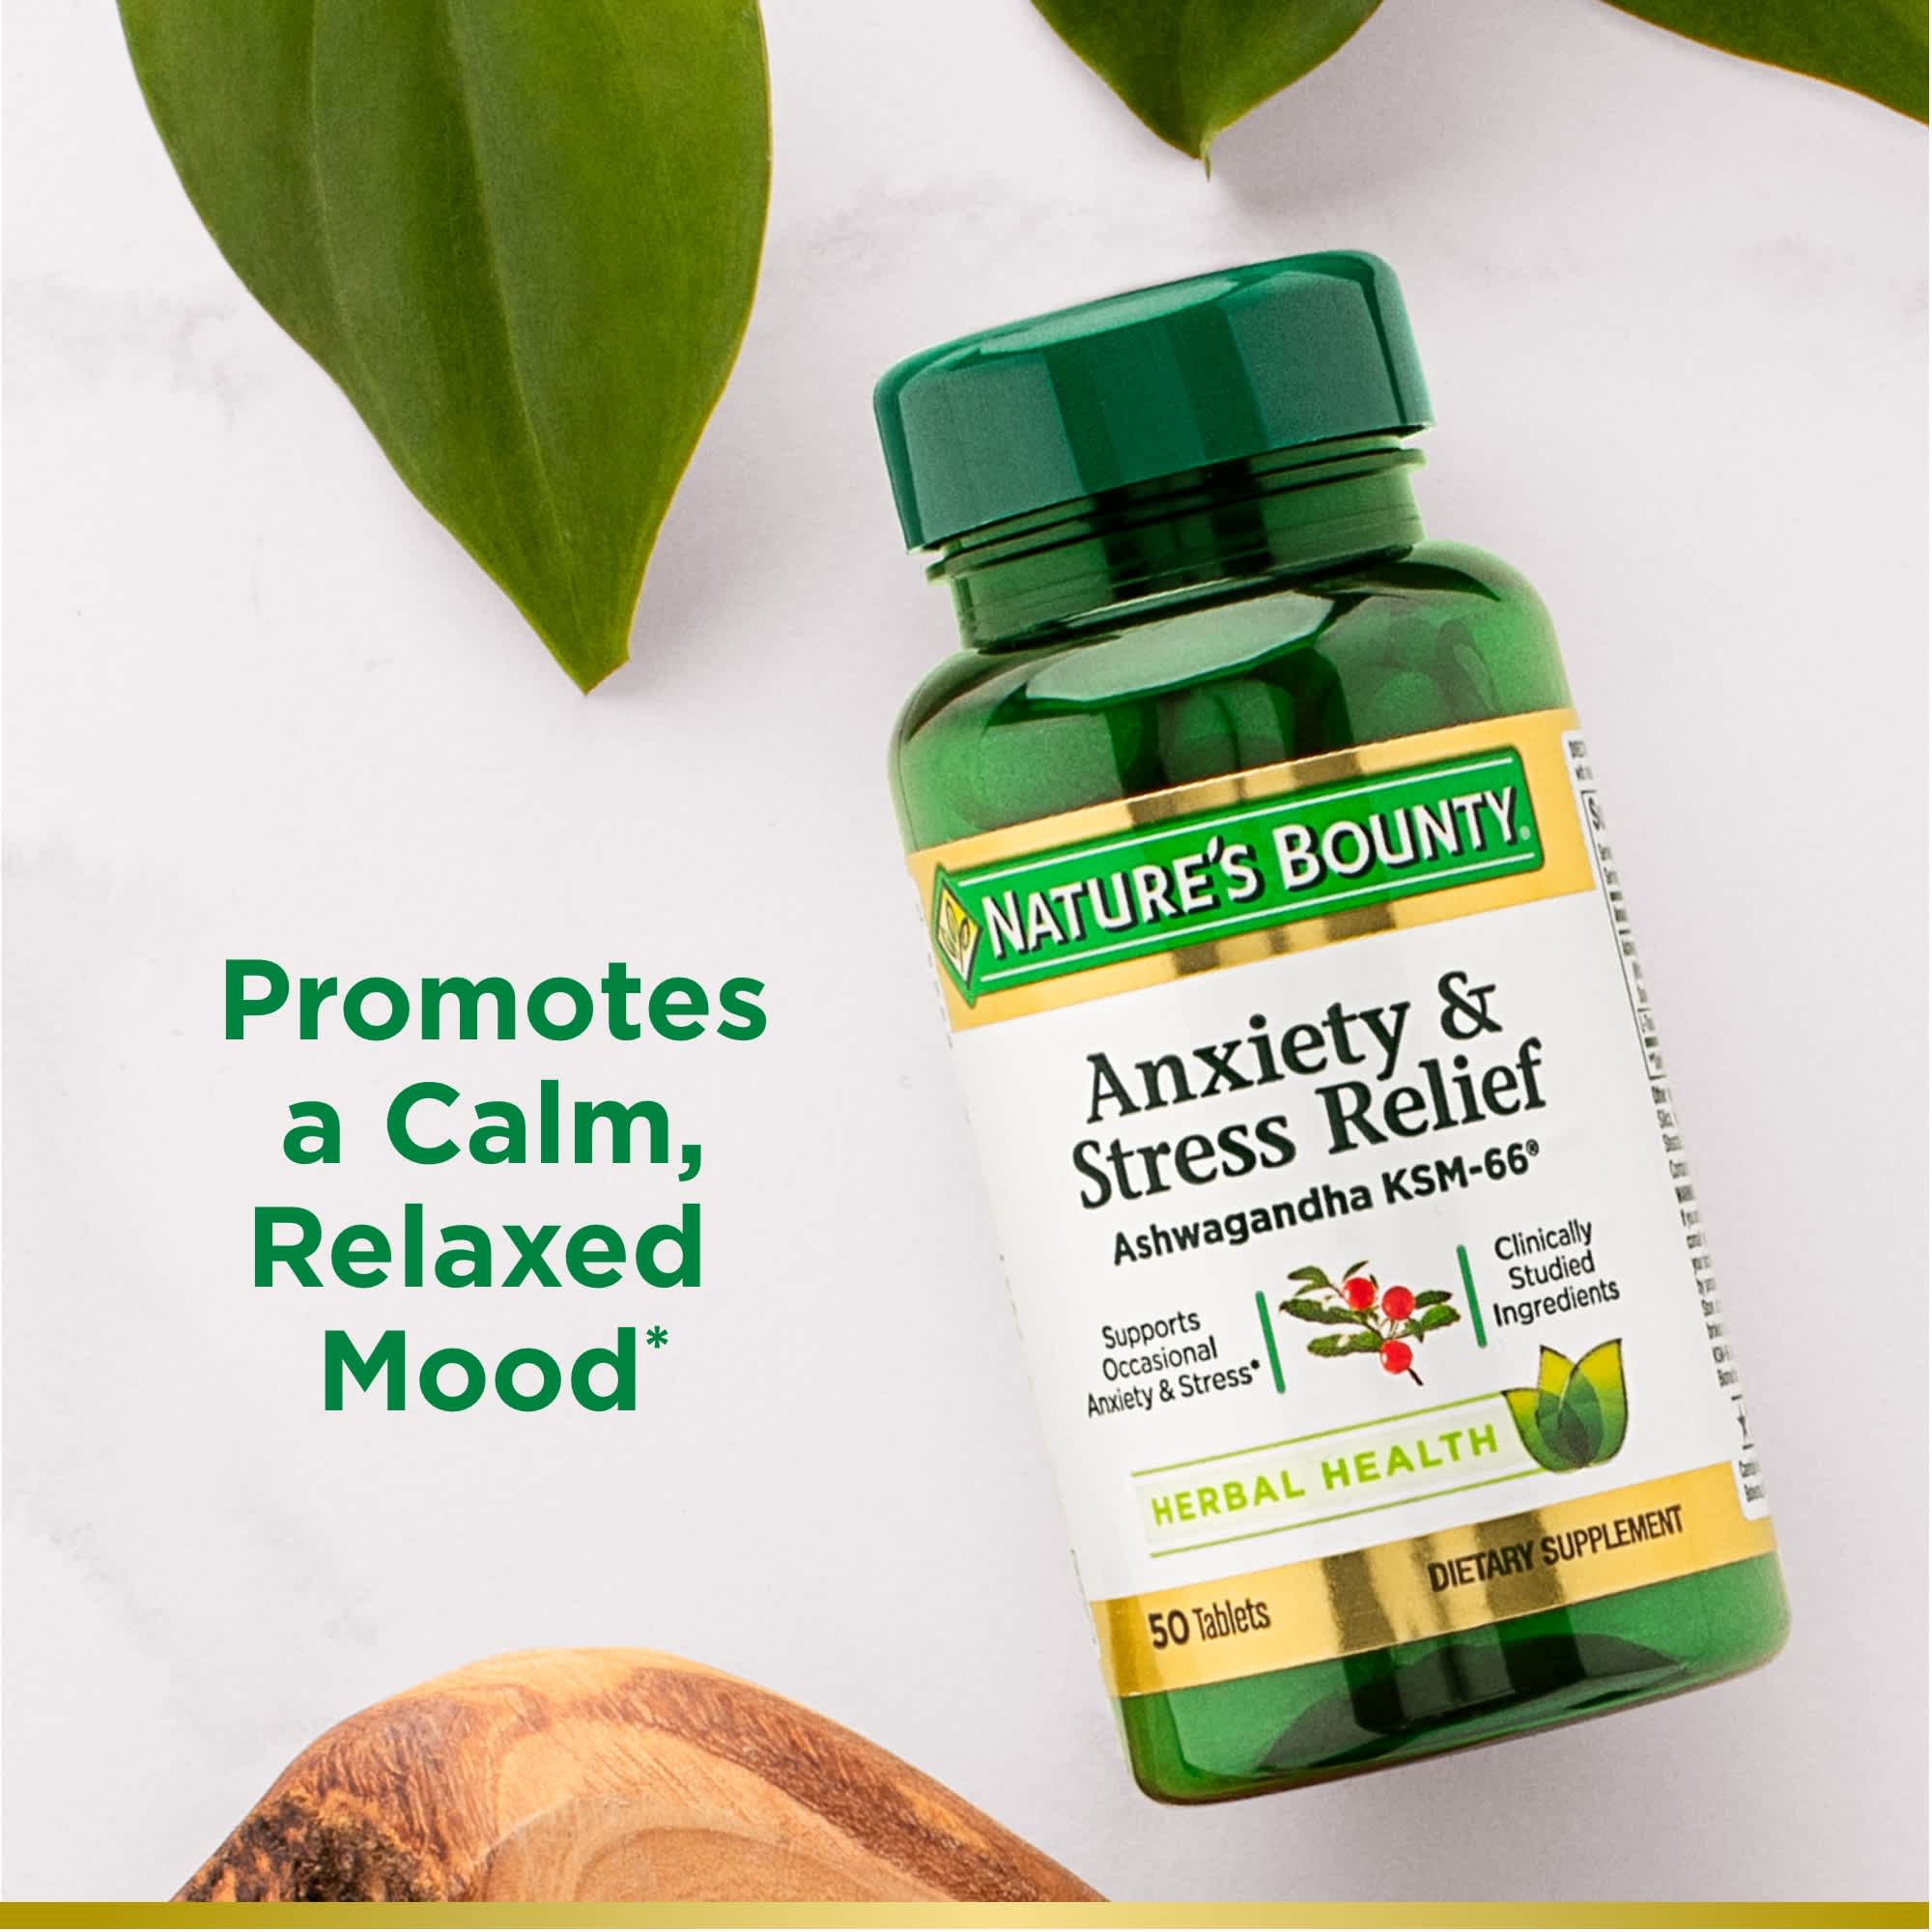 Nature’s Bounty Anxiety & Stress Relief  Supplement, Ashwagandha KSM 66 , 50 Ct - image 5 of 8